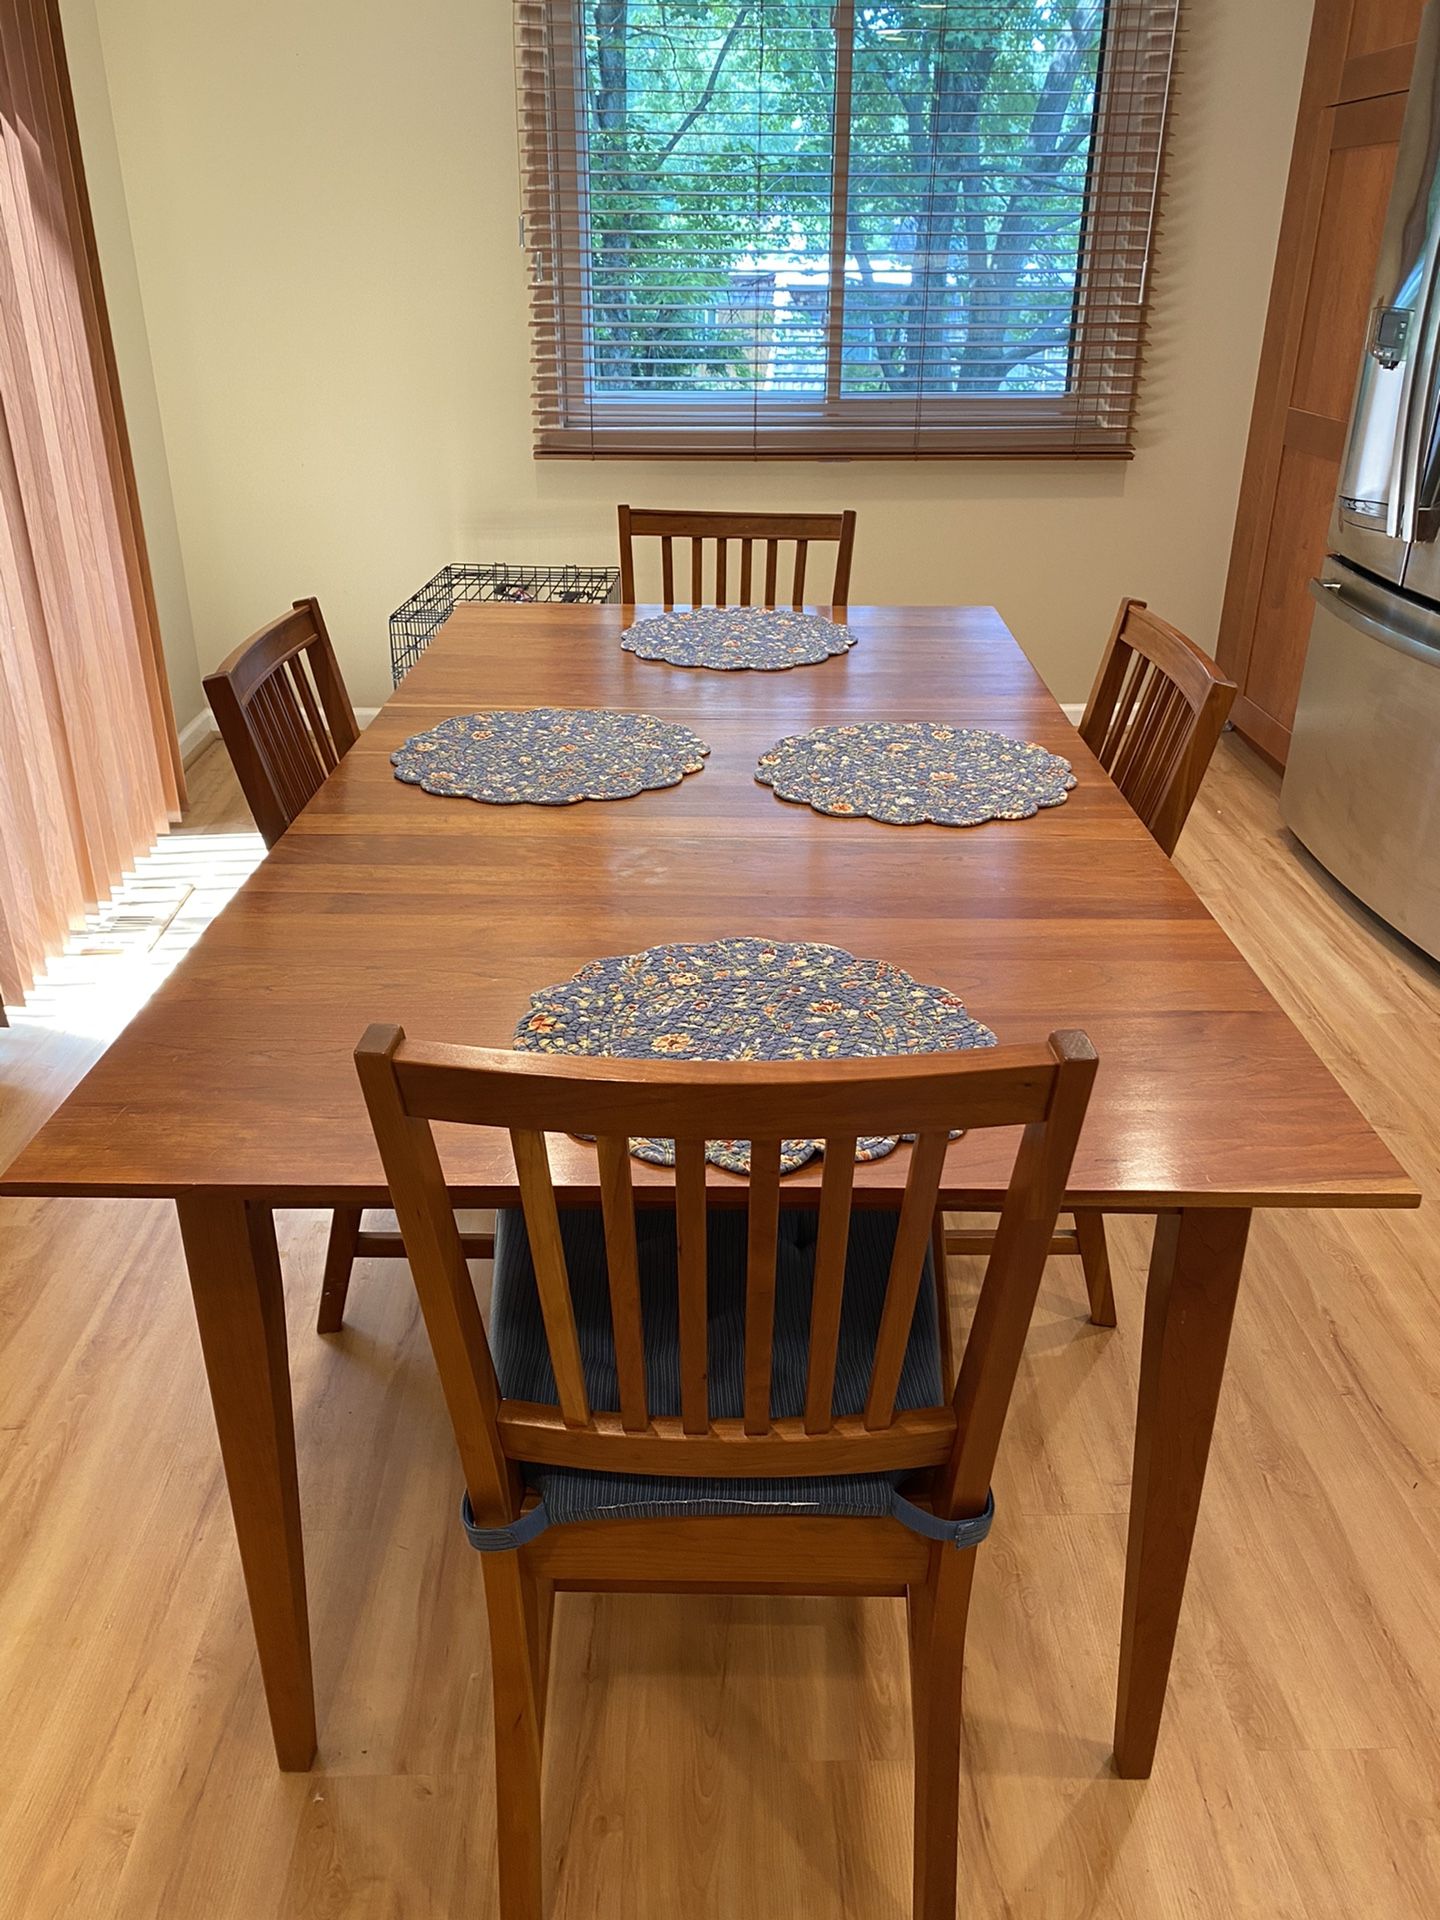 Solid wood kitchen table and 4 chairs.